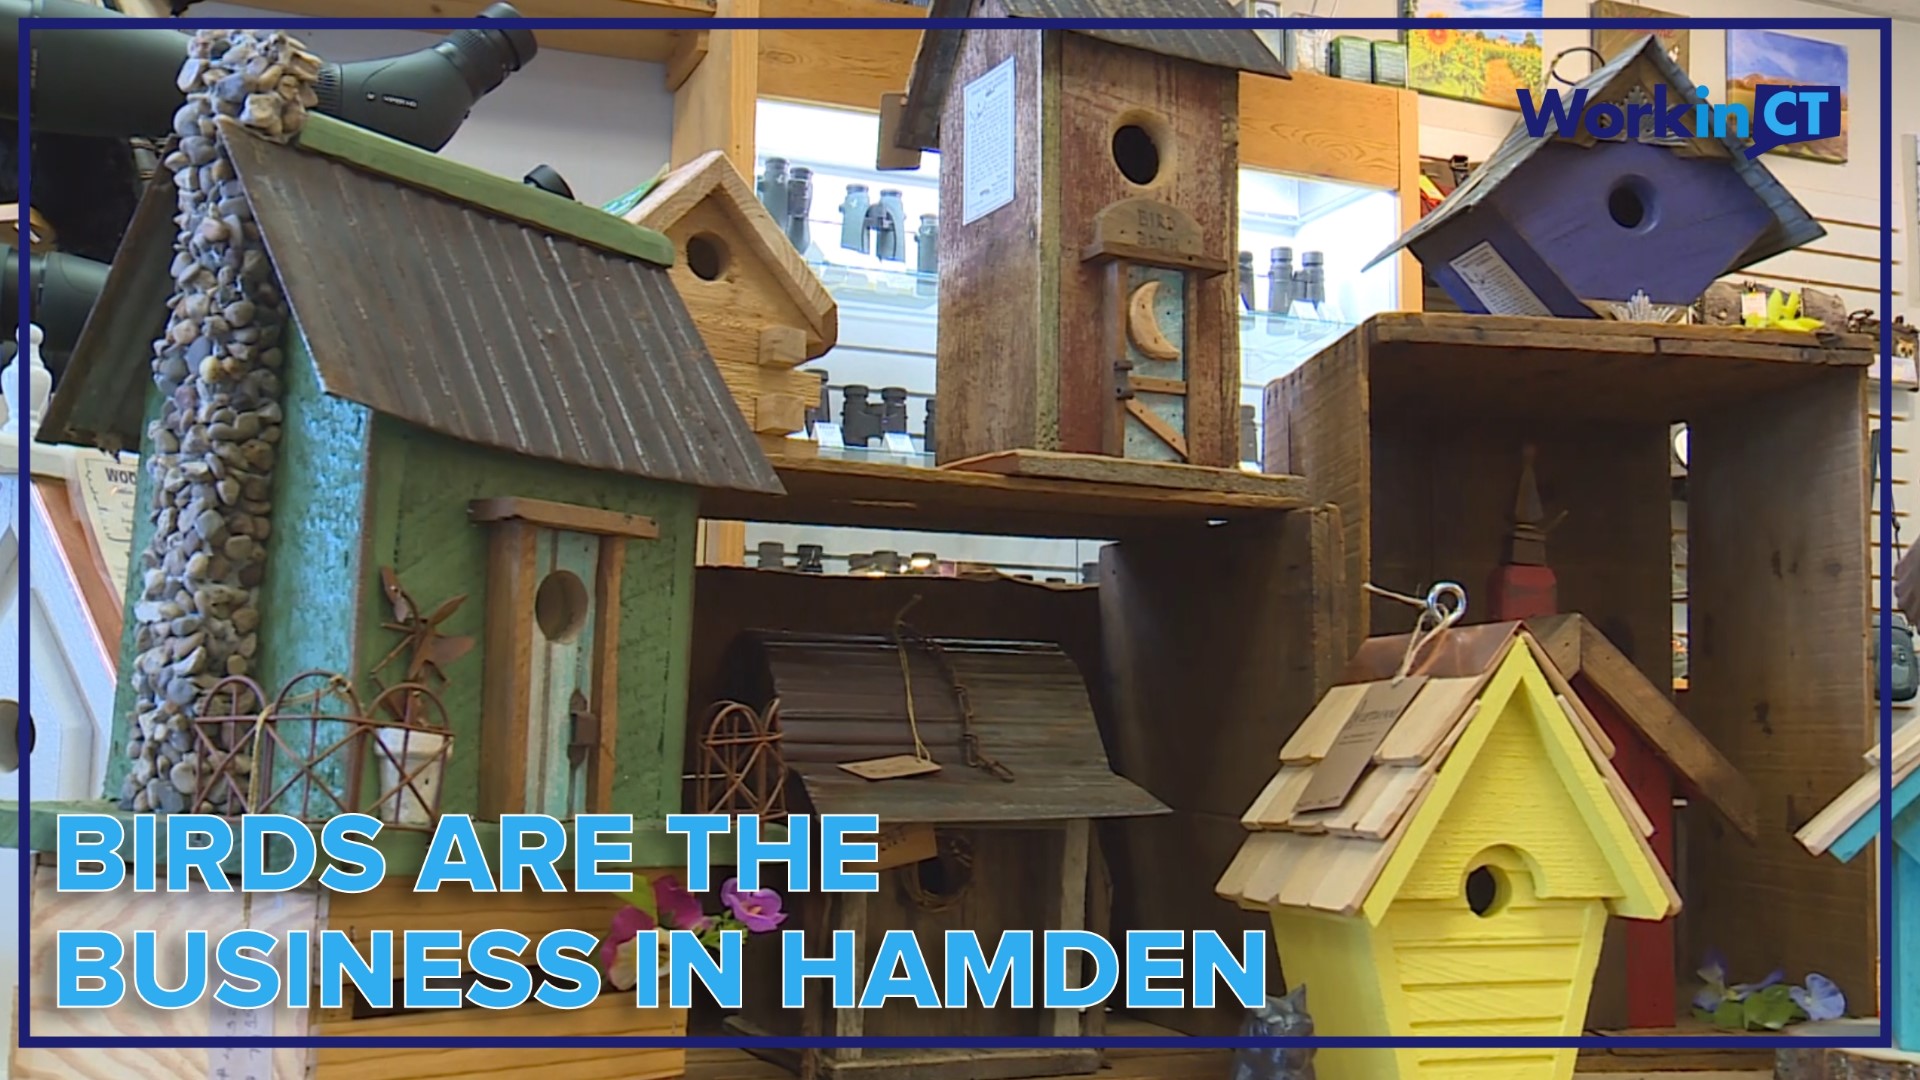 The Hamden store sells all types of seeds and birdhouses and an array of high-end items like binoculars.